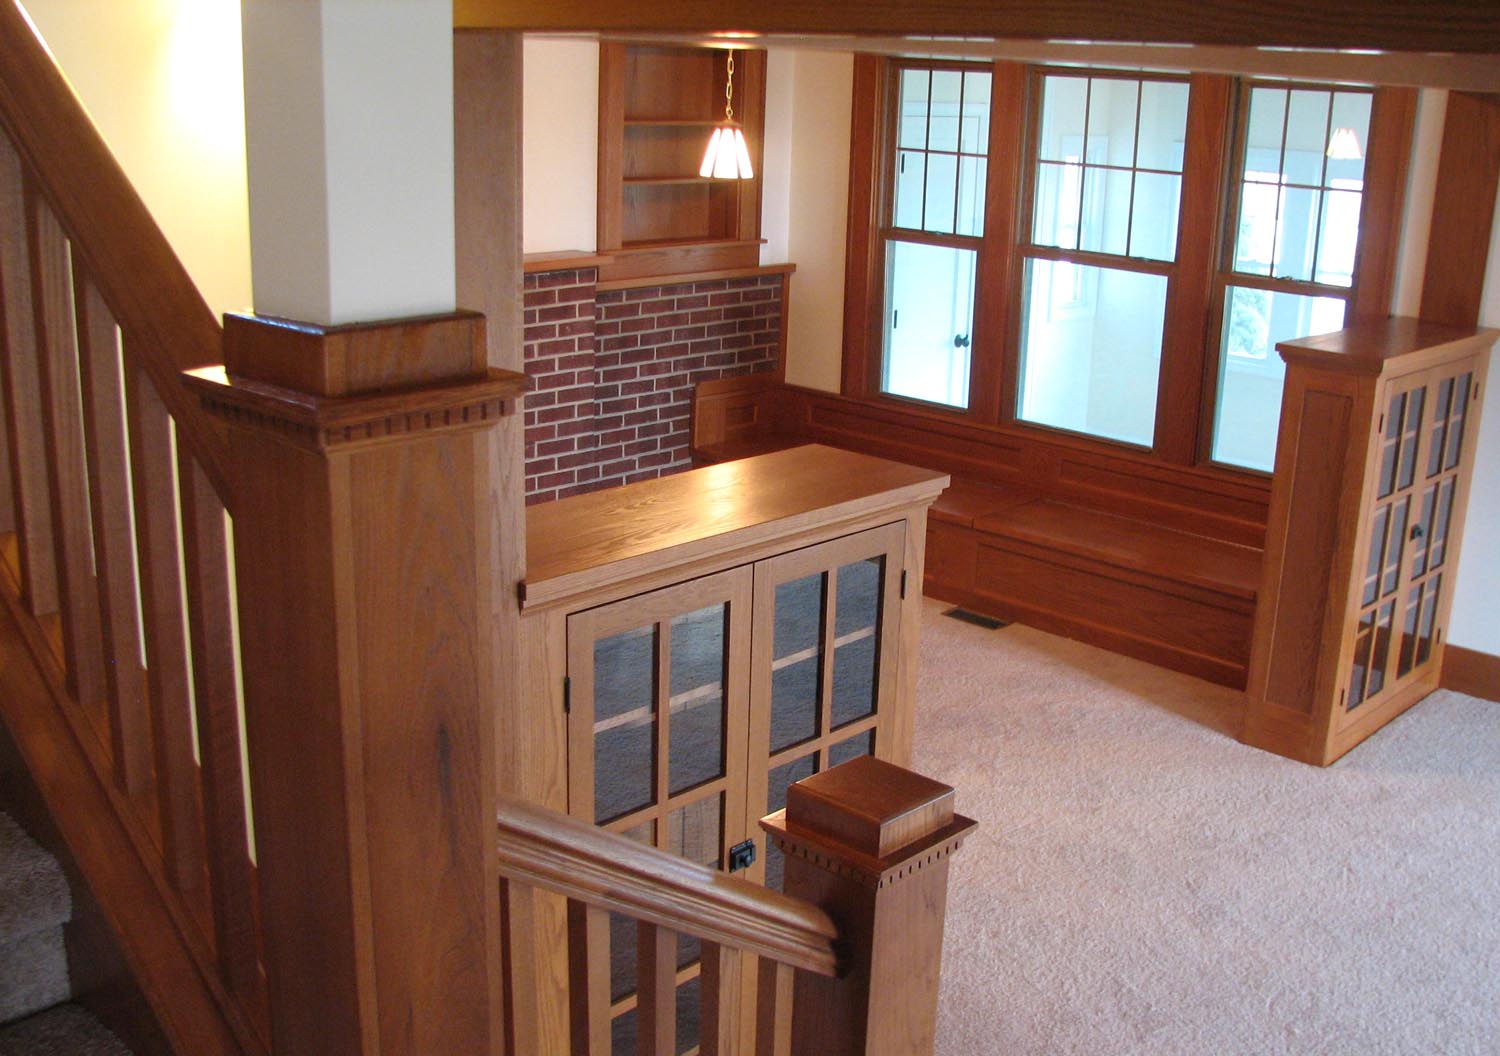 residential Millwork Gallery Images_0002_Layer 6.jpg